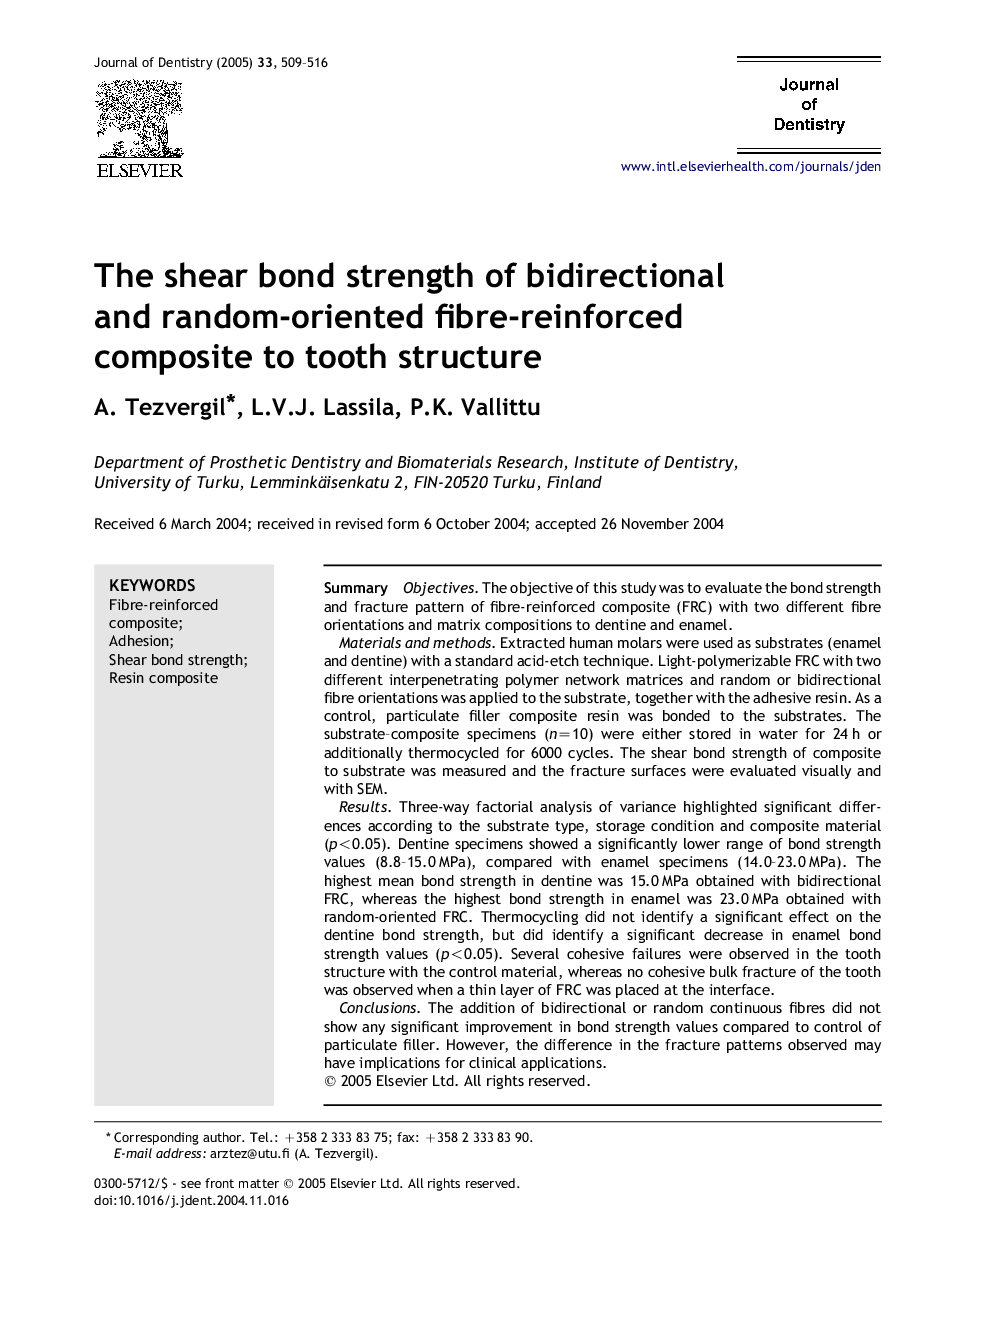 The shear bond strength of bidirectional and random-oriented fibre-reinforced composite to tooth structure